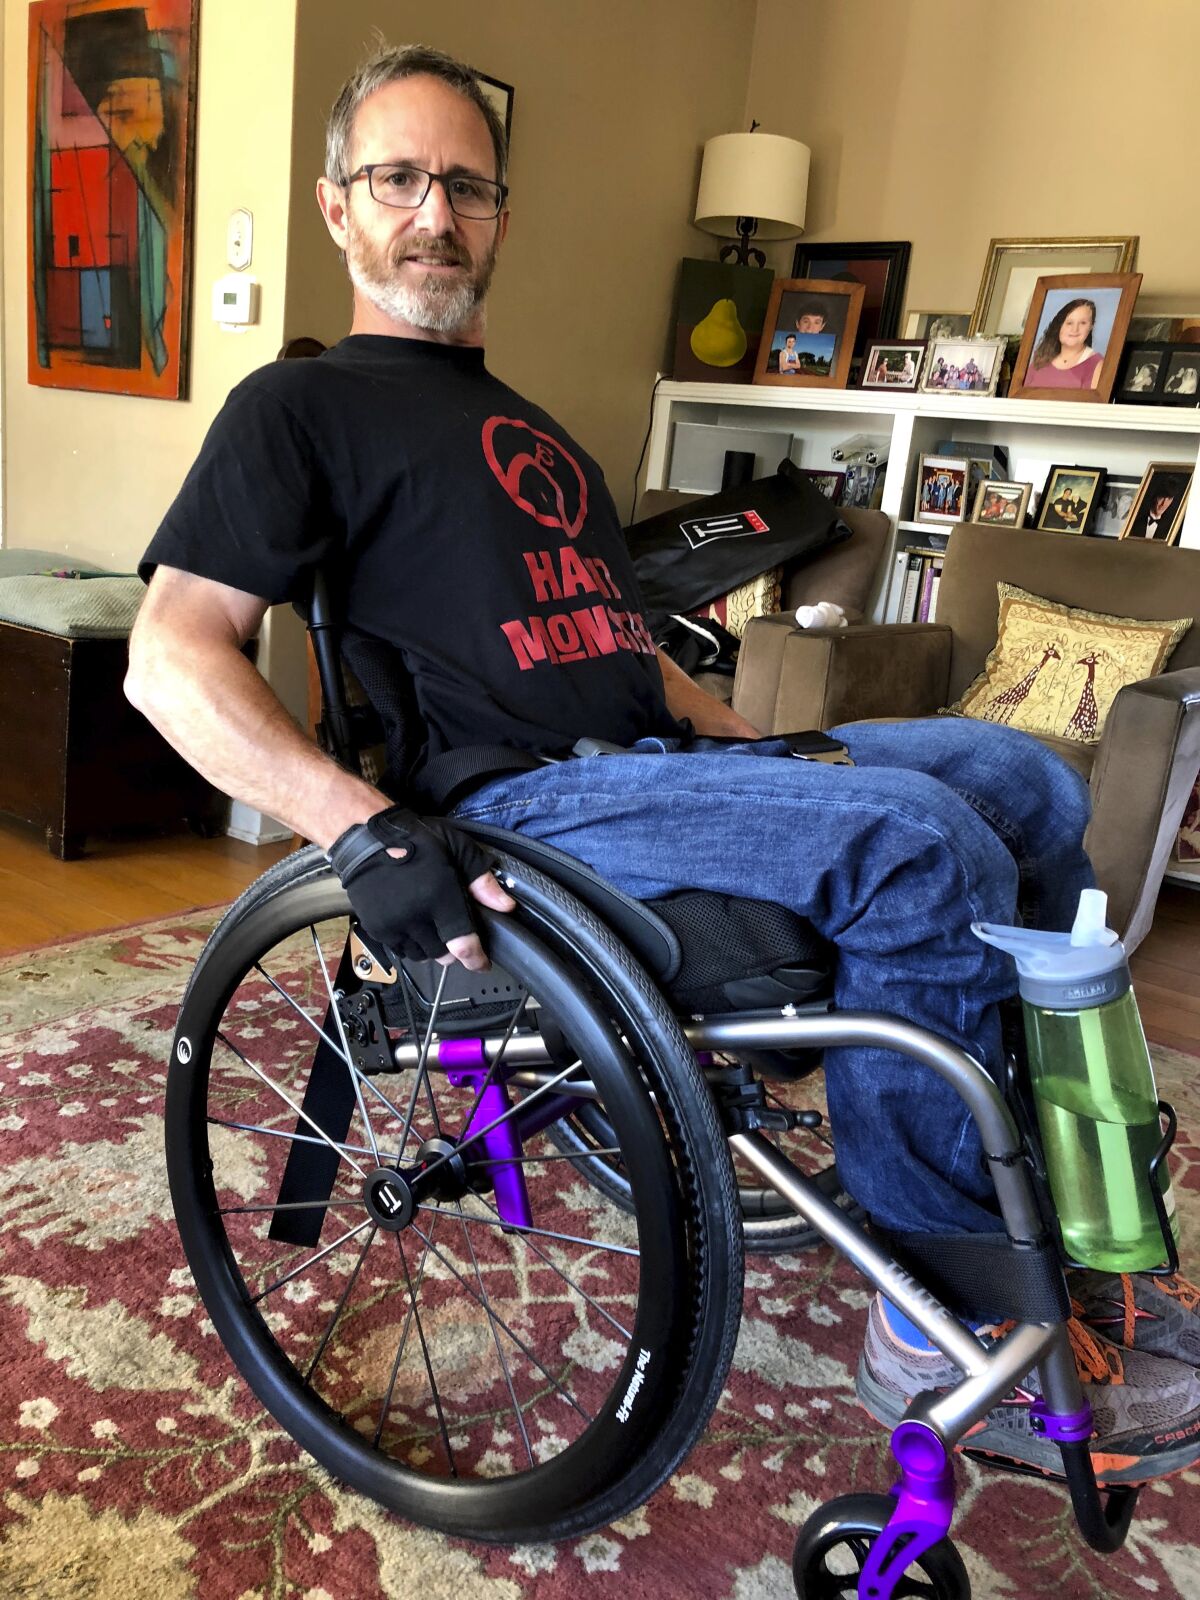 In this May 15, 2018 photo, Samuel Kolb poses for a photo in San Mateo, Calif. A Northern California county has agreed to pay nearly $10 million to settle a lawsuit by Kolb, who was going through a severe epileptic episode when a deputy shot him in the abdomen, paralyzing him from the waist down. (Karin Kolb via AP)